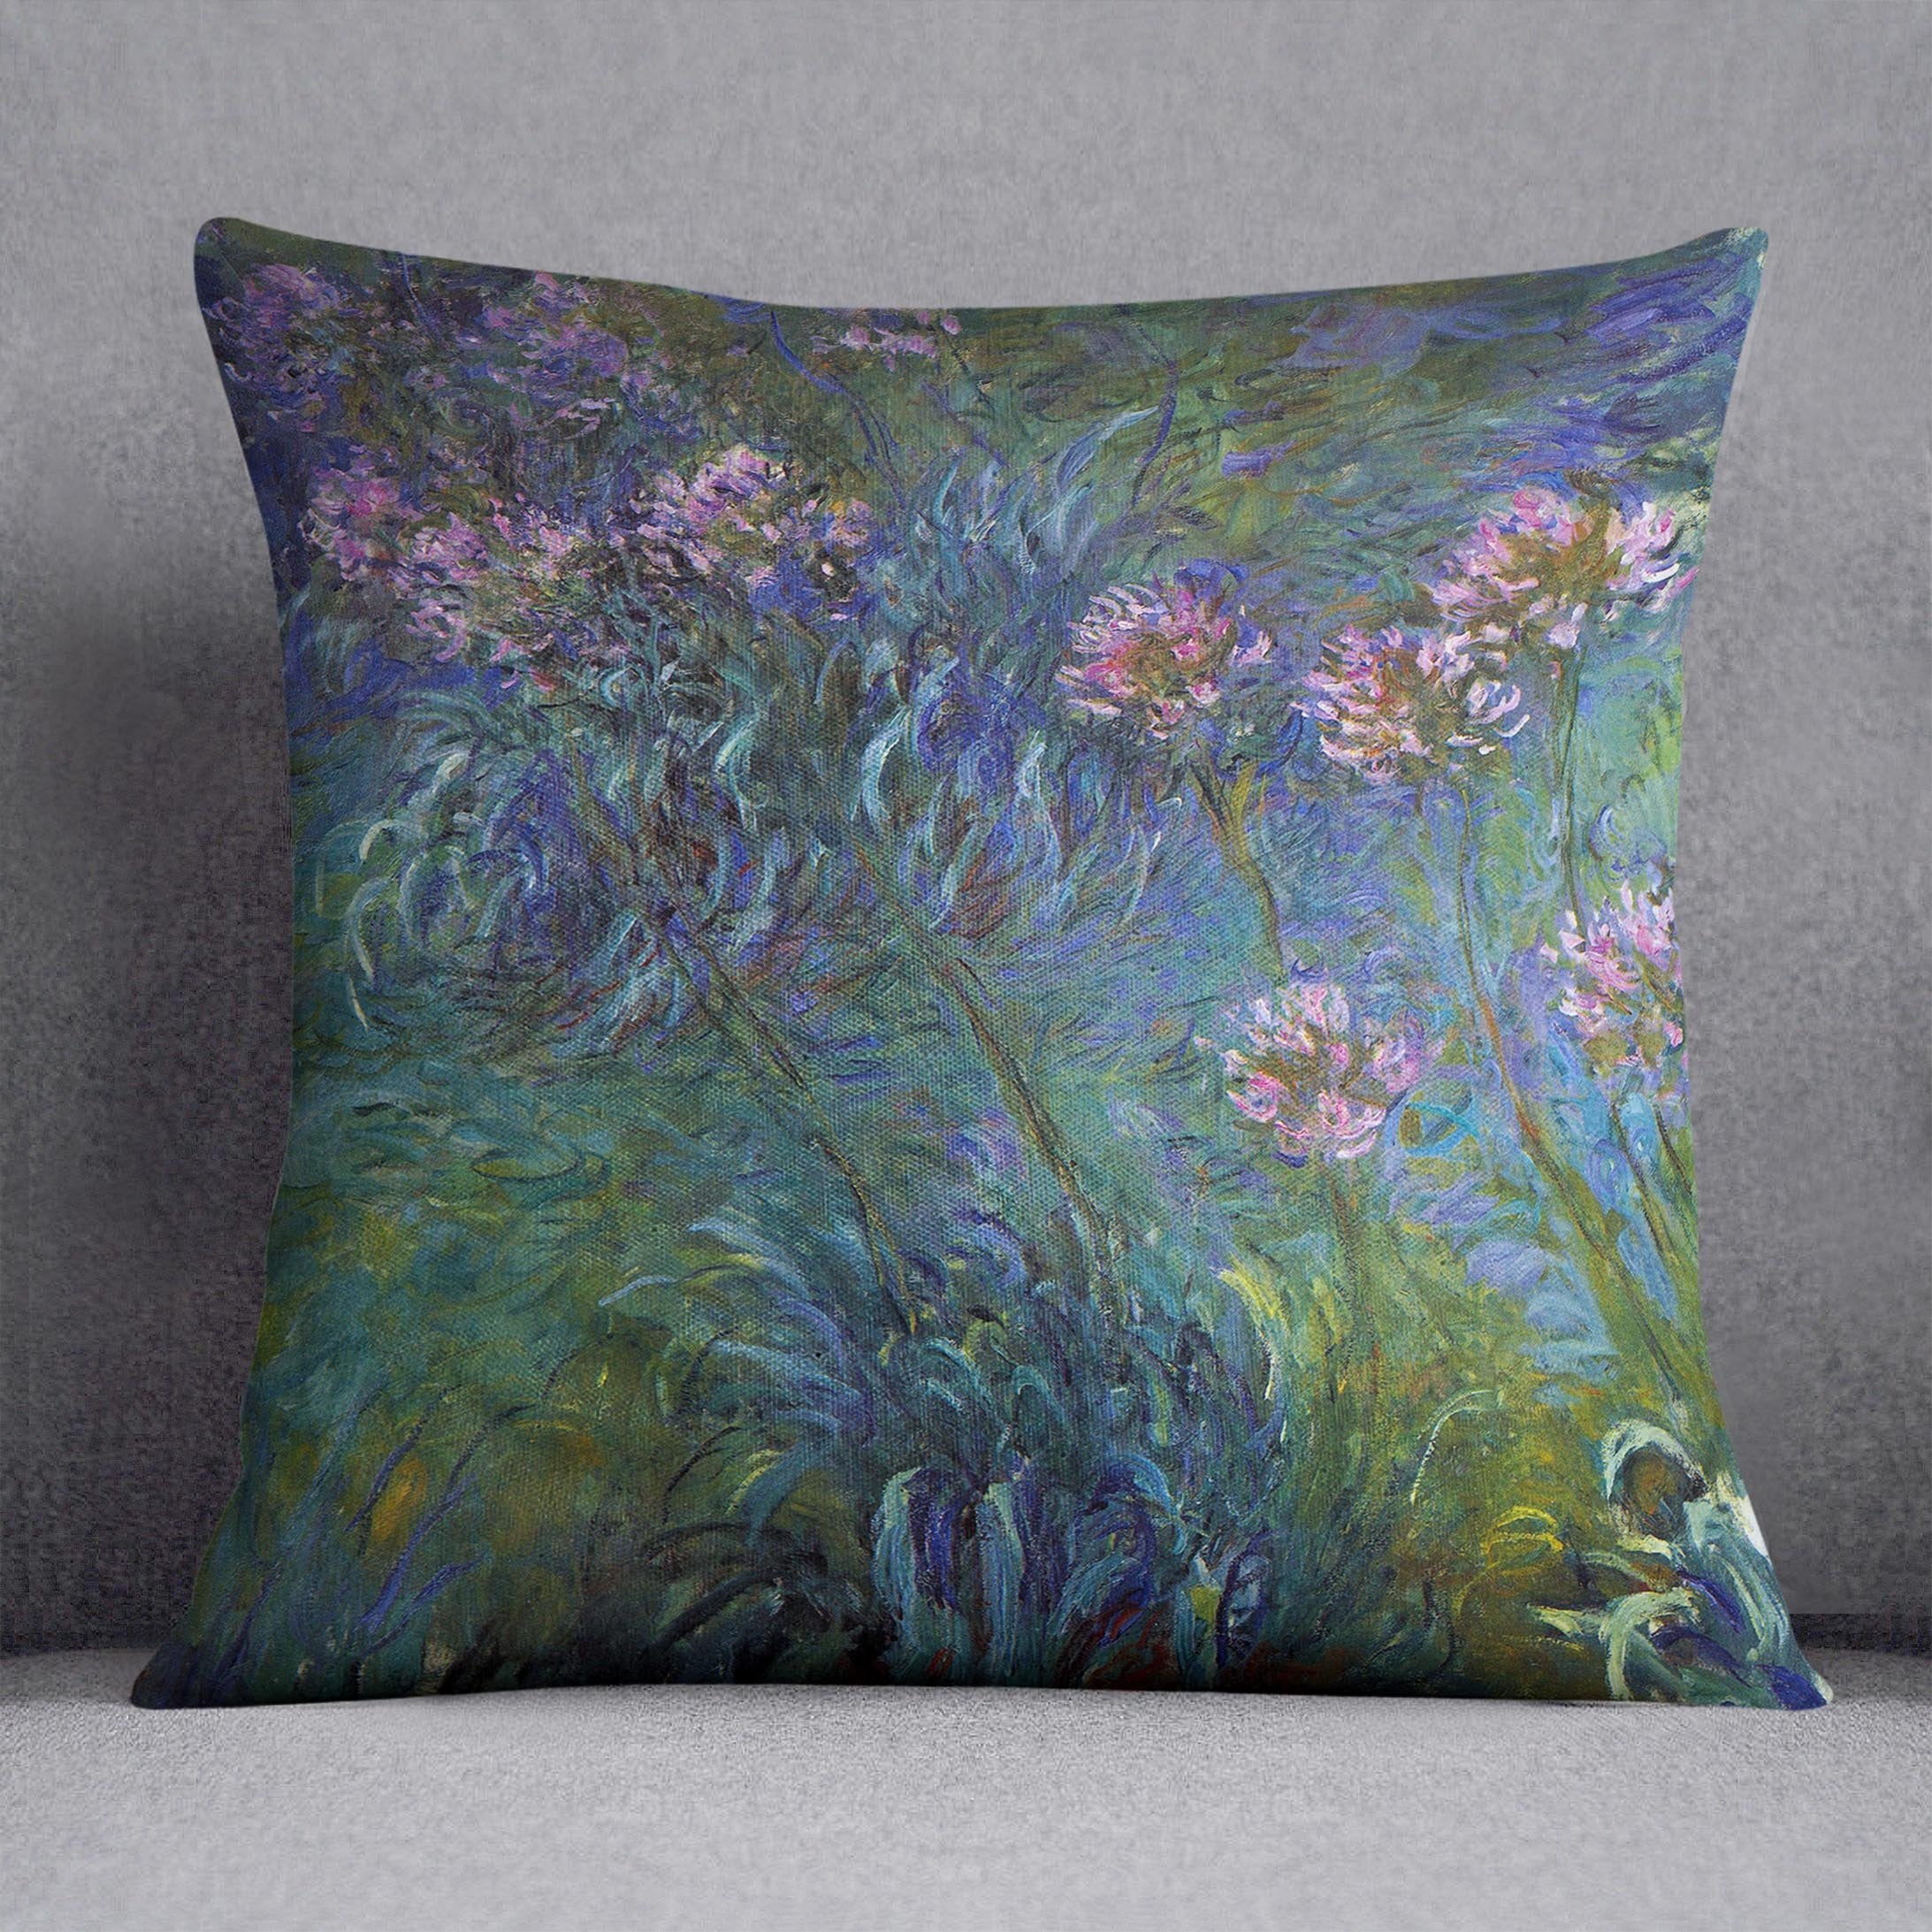 Jewelry lilies by Monet Throw Pillow